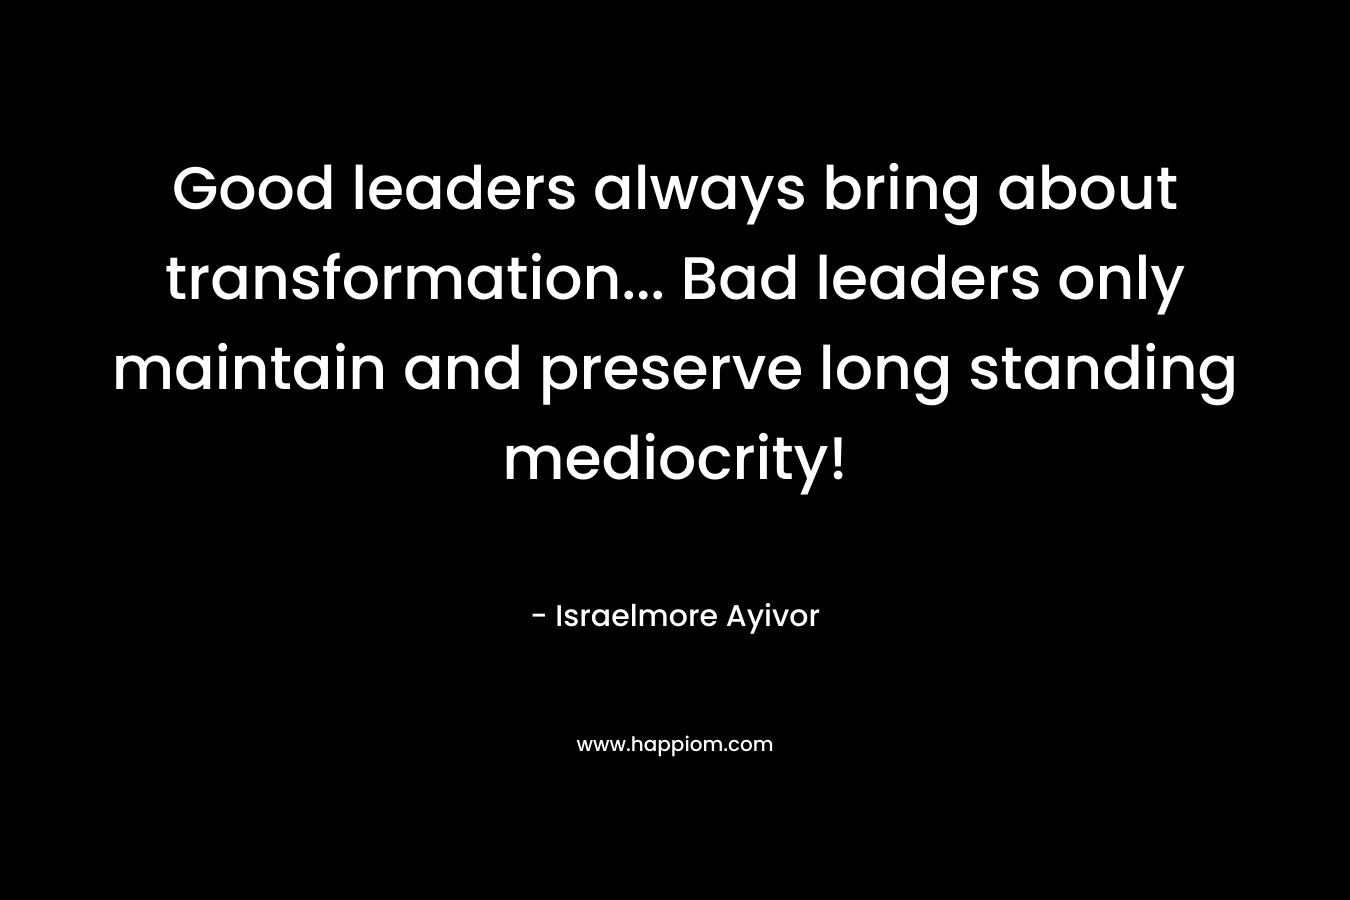 Good leaders always bring about transformation... Bad leaders only maintain and preserve long standing mediocrity!